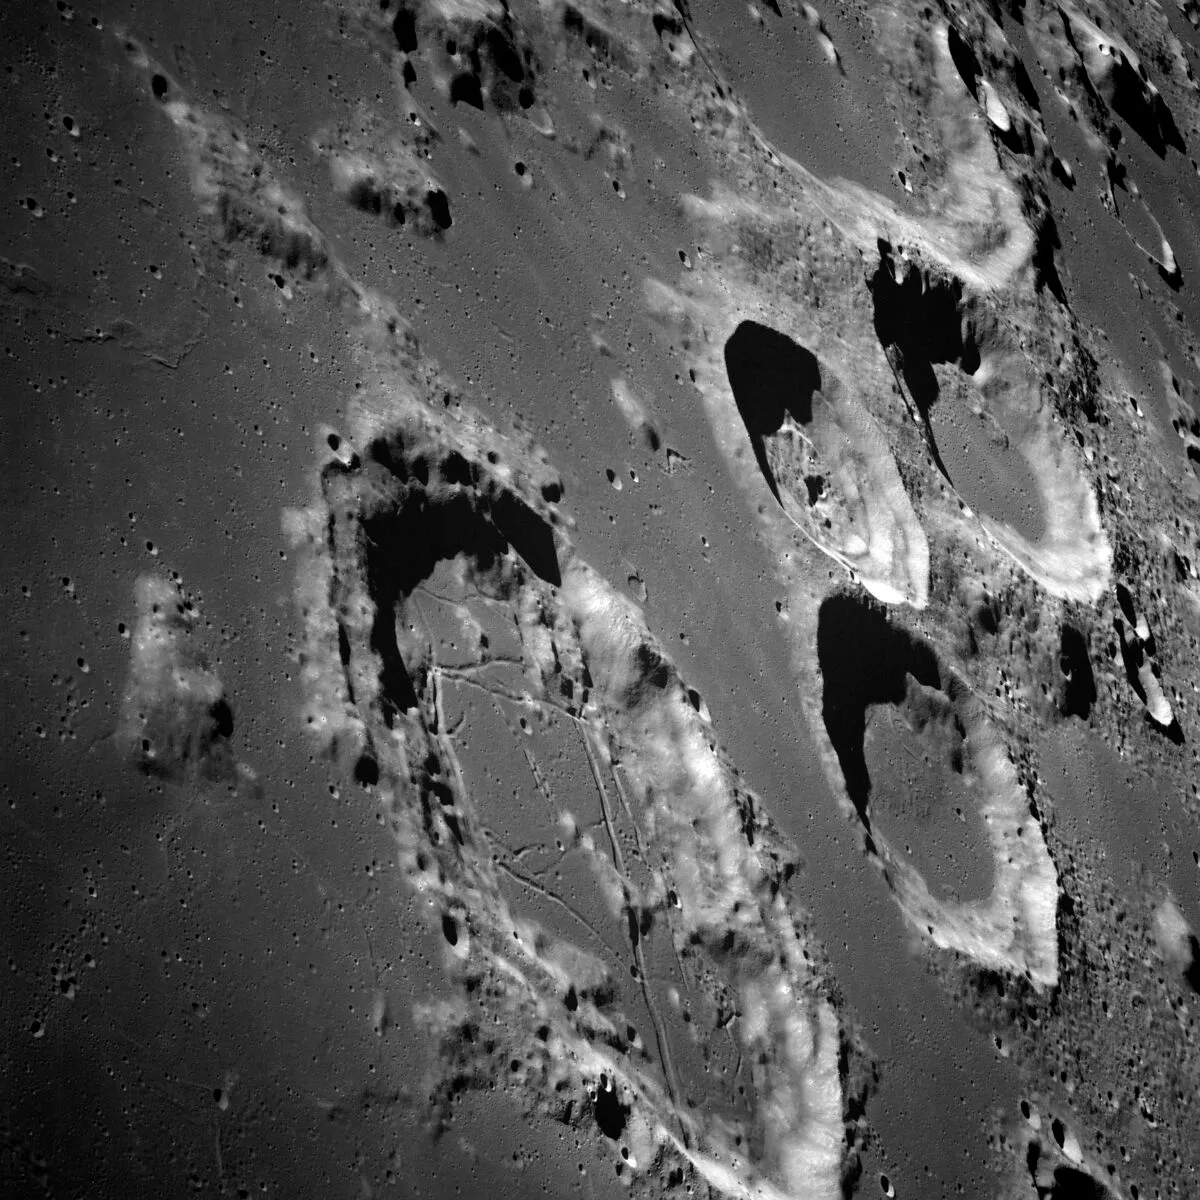 A view of the lunar surface captured during the Apollo 8 mission. Credit: Stocktrek Images